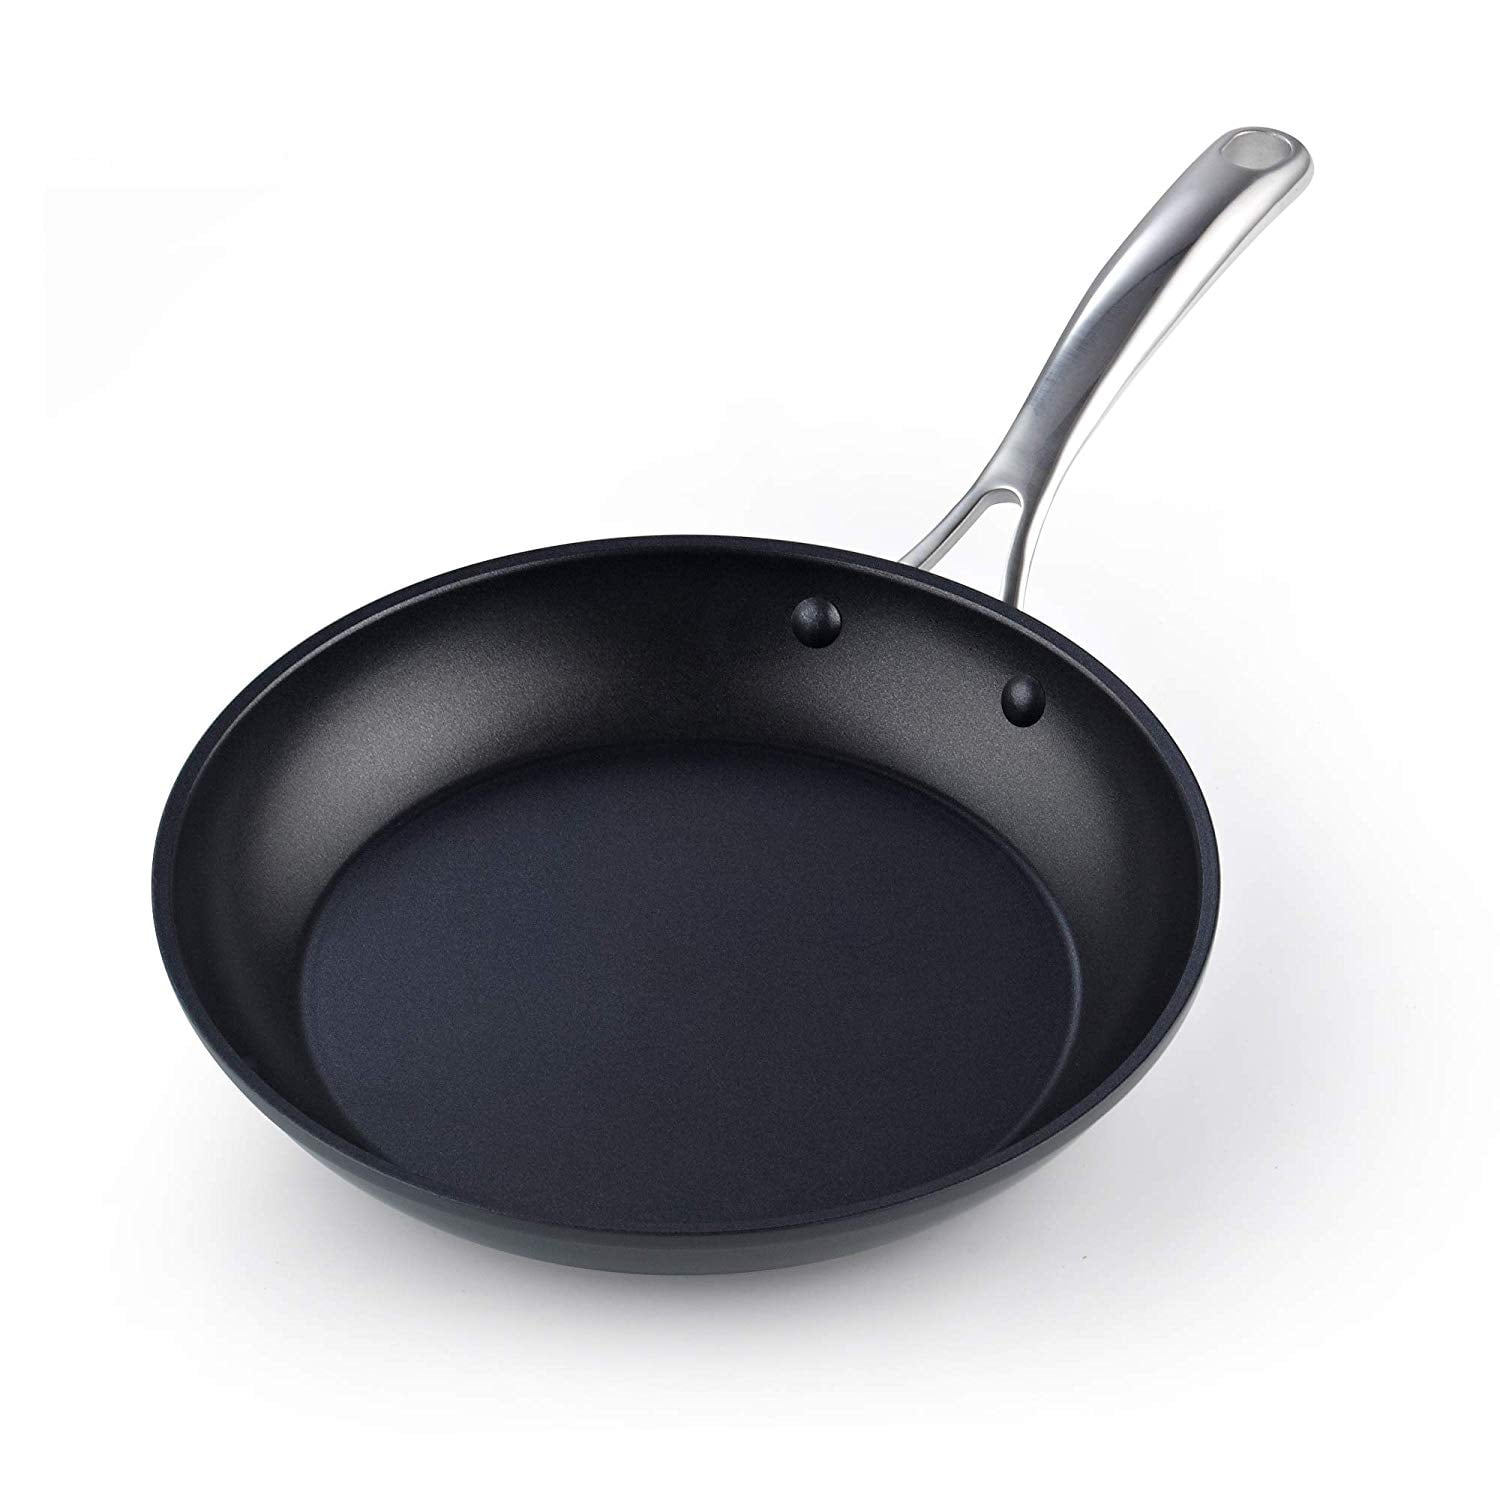 Cooks Standard 02569 8-Inch/20cm Nonstick Hard Anodized Fry Saute Omelet  Pan, 8-inch, Black